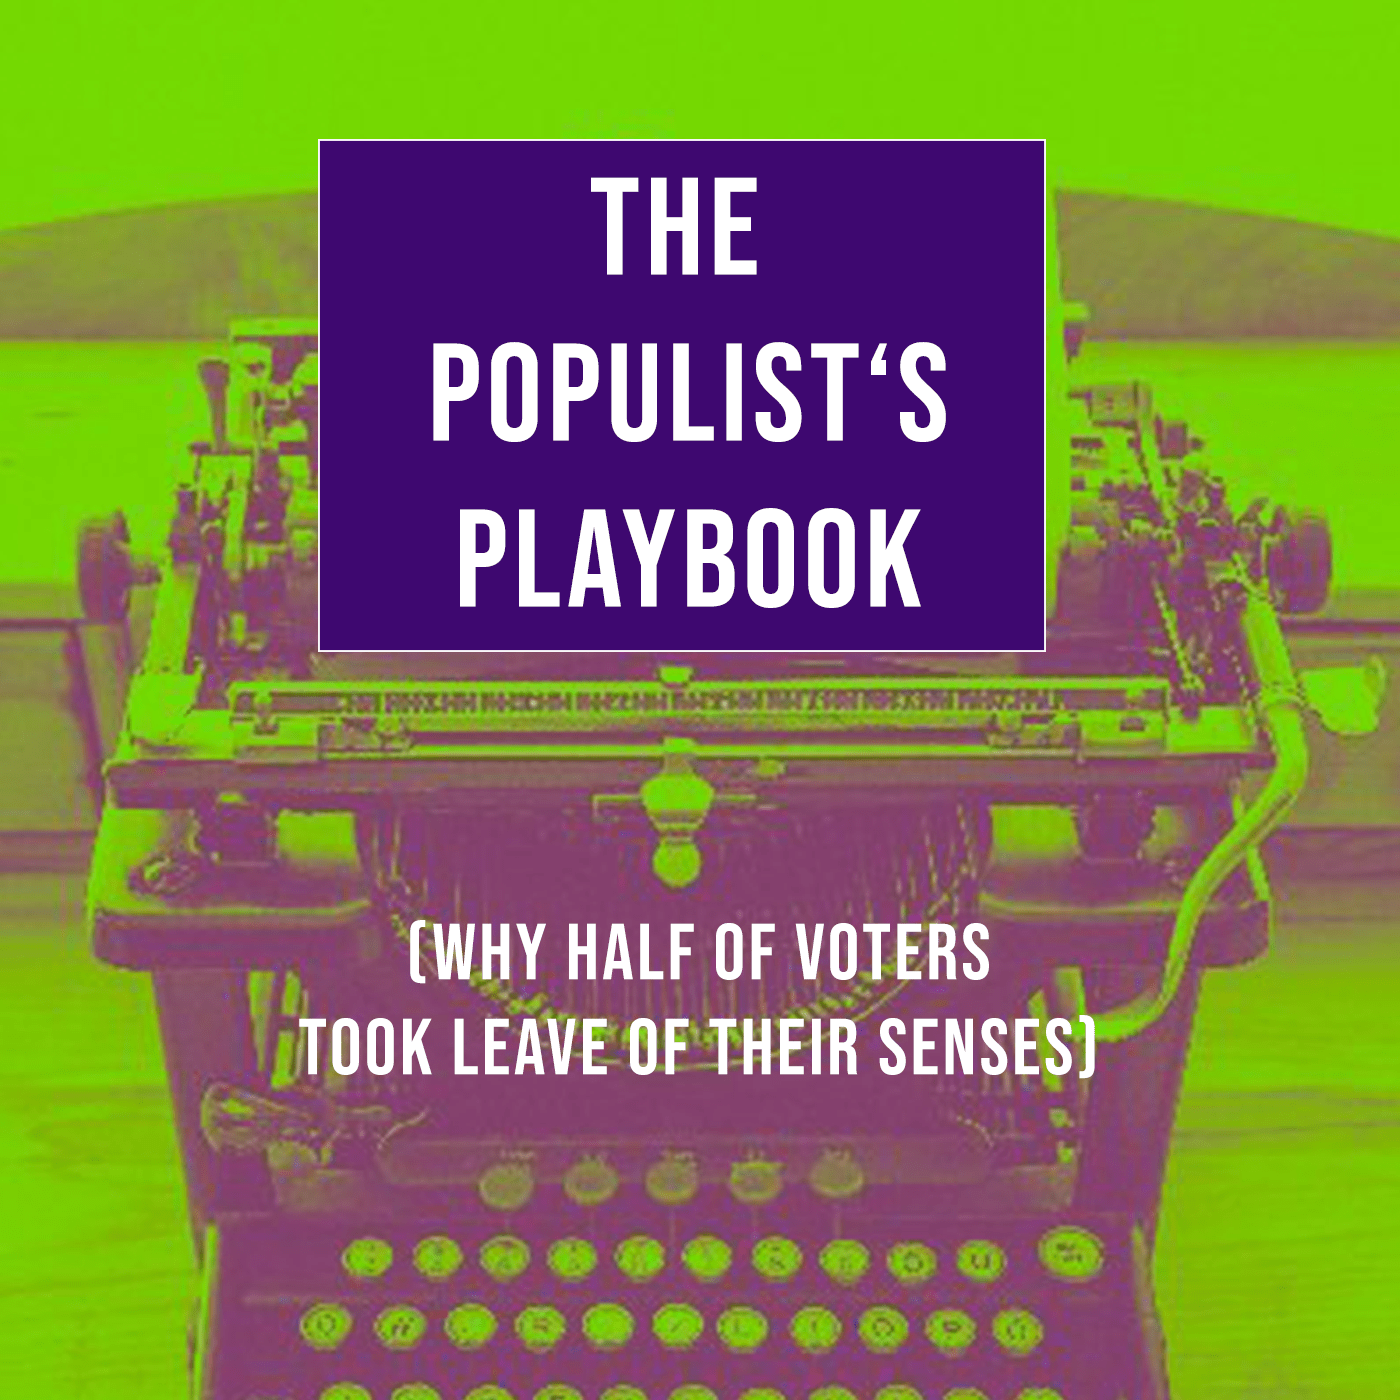 The Populist's Playbook